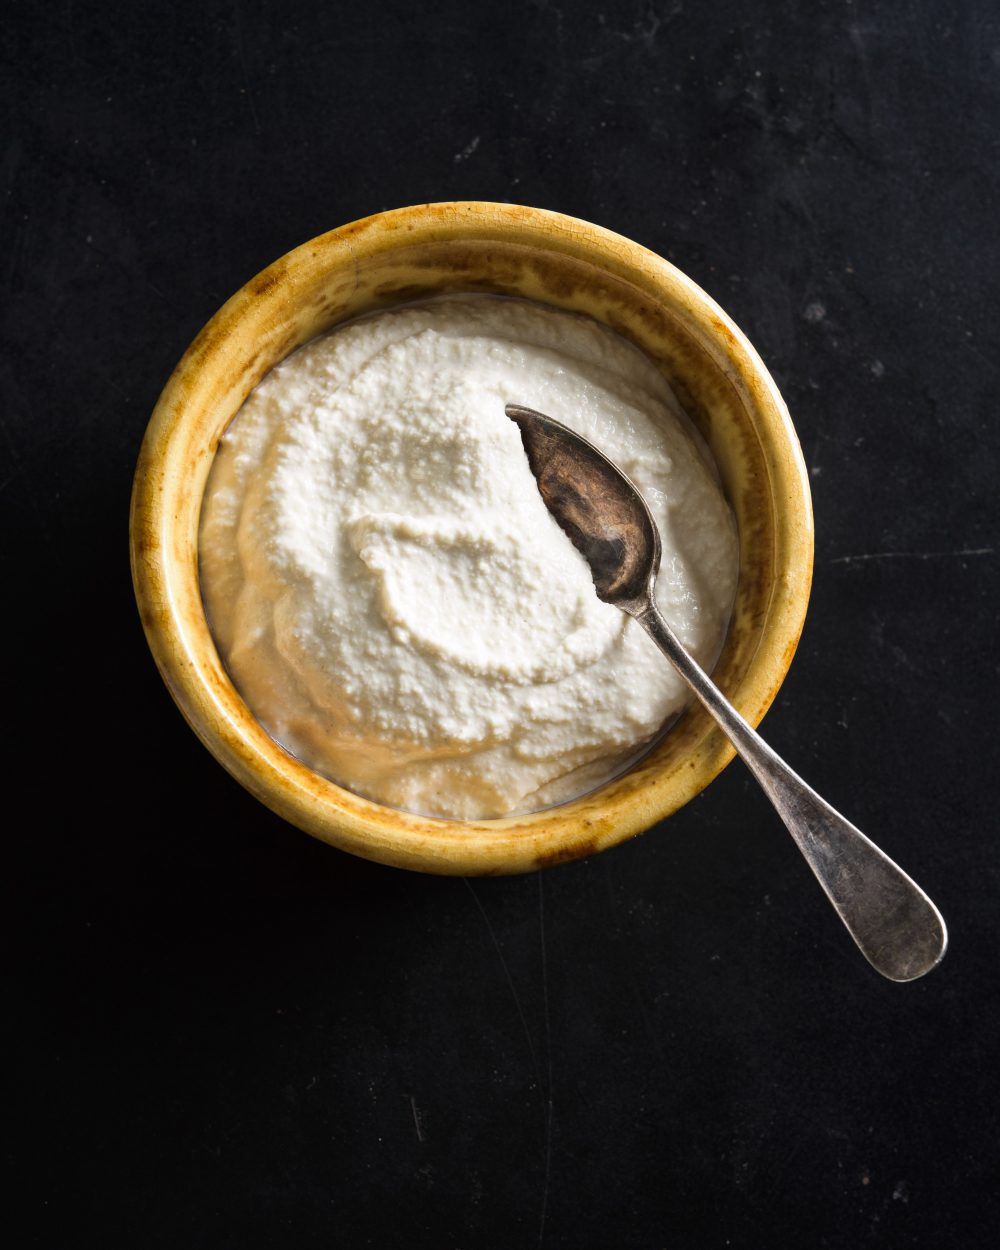 For amazing tahini, all you need is sesame and a blender.